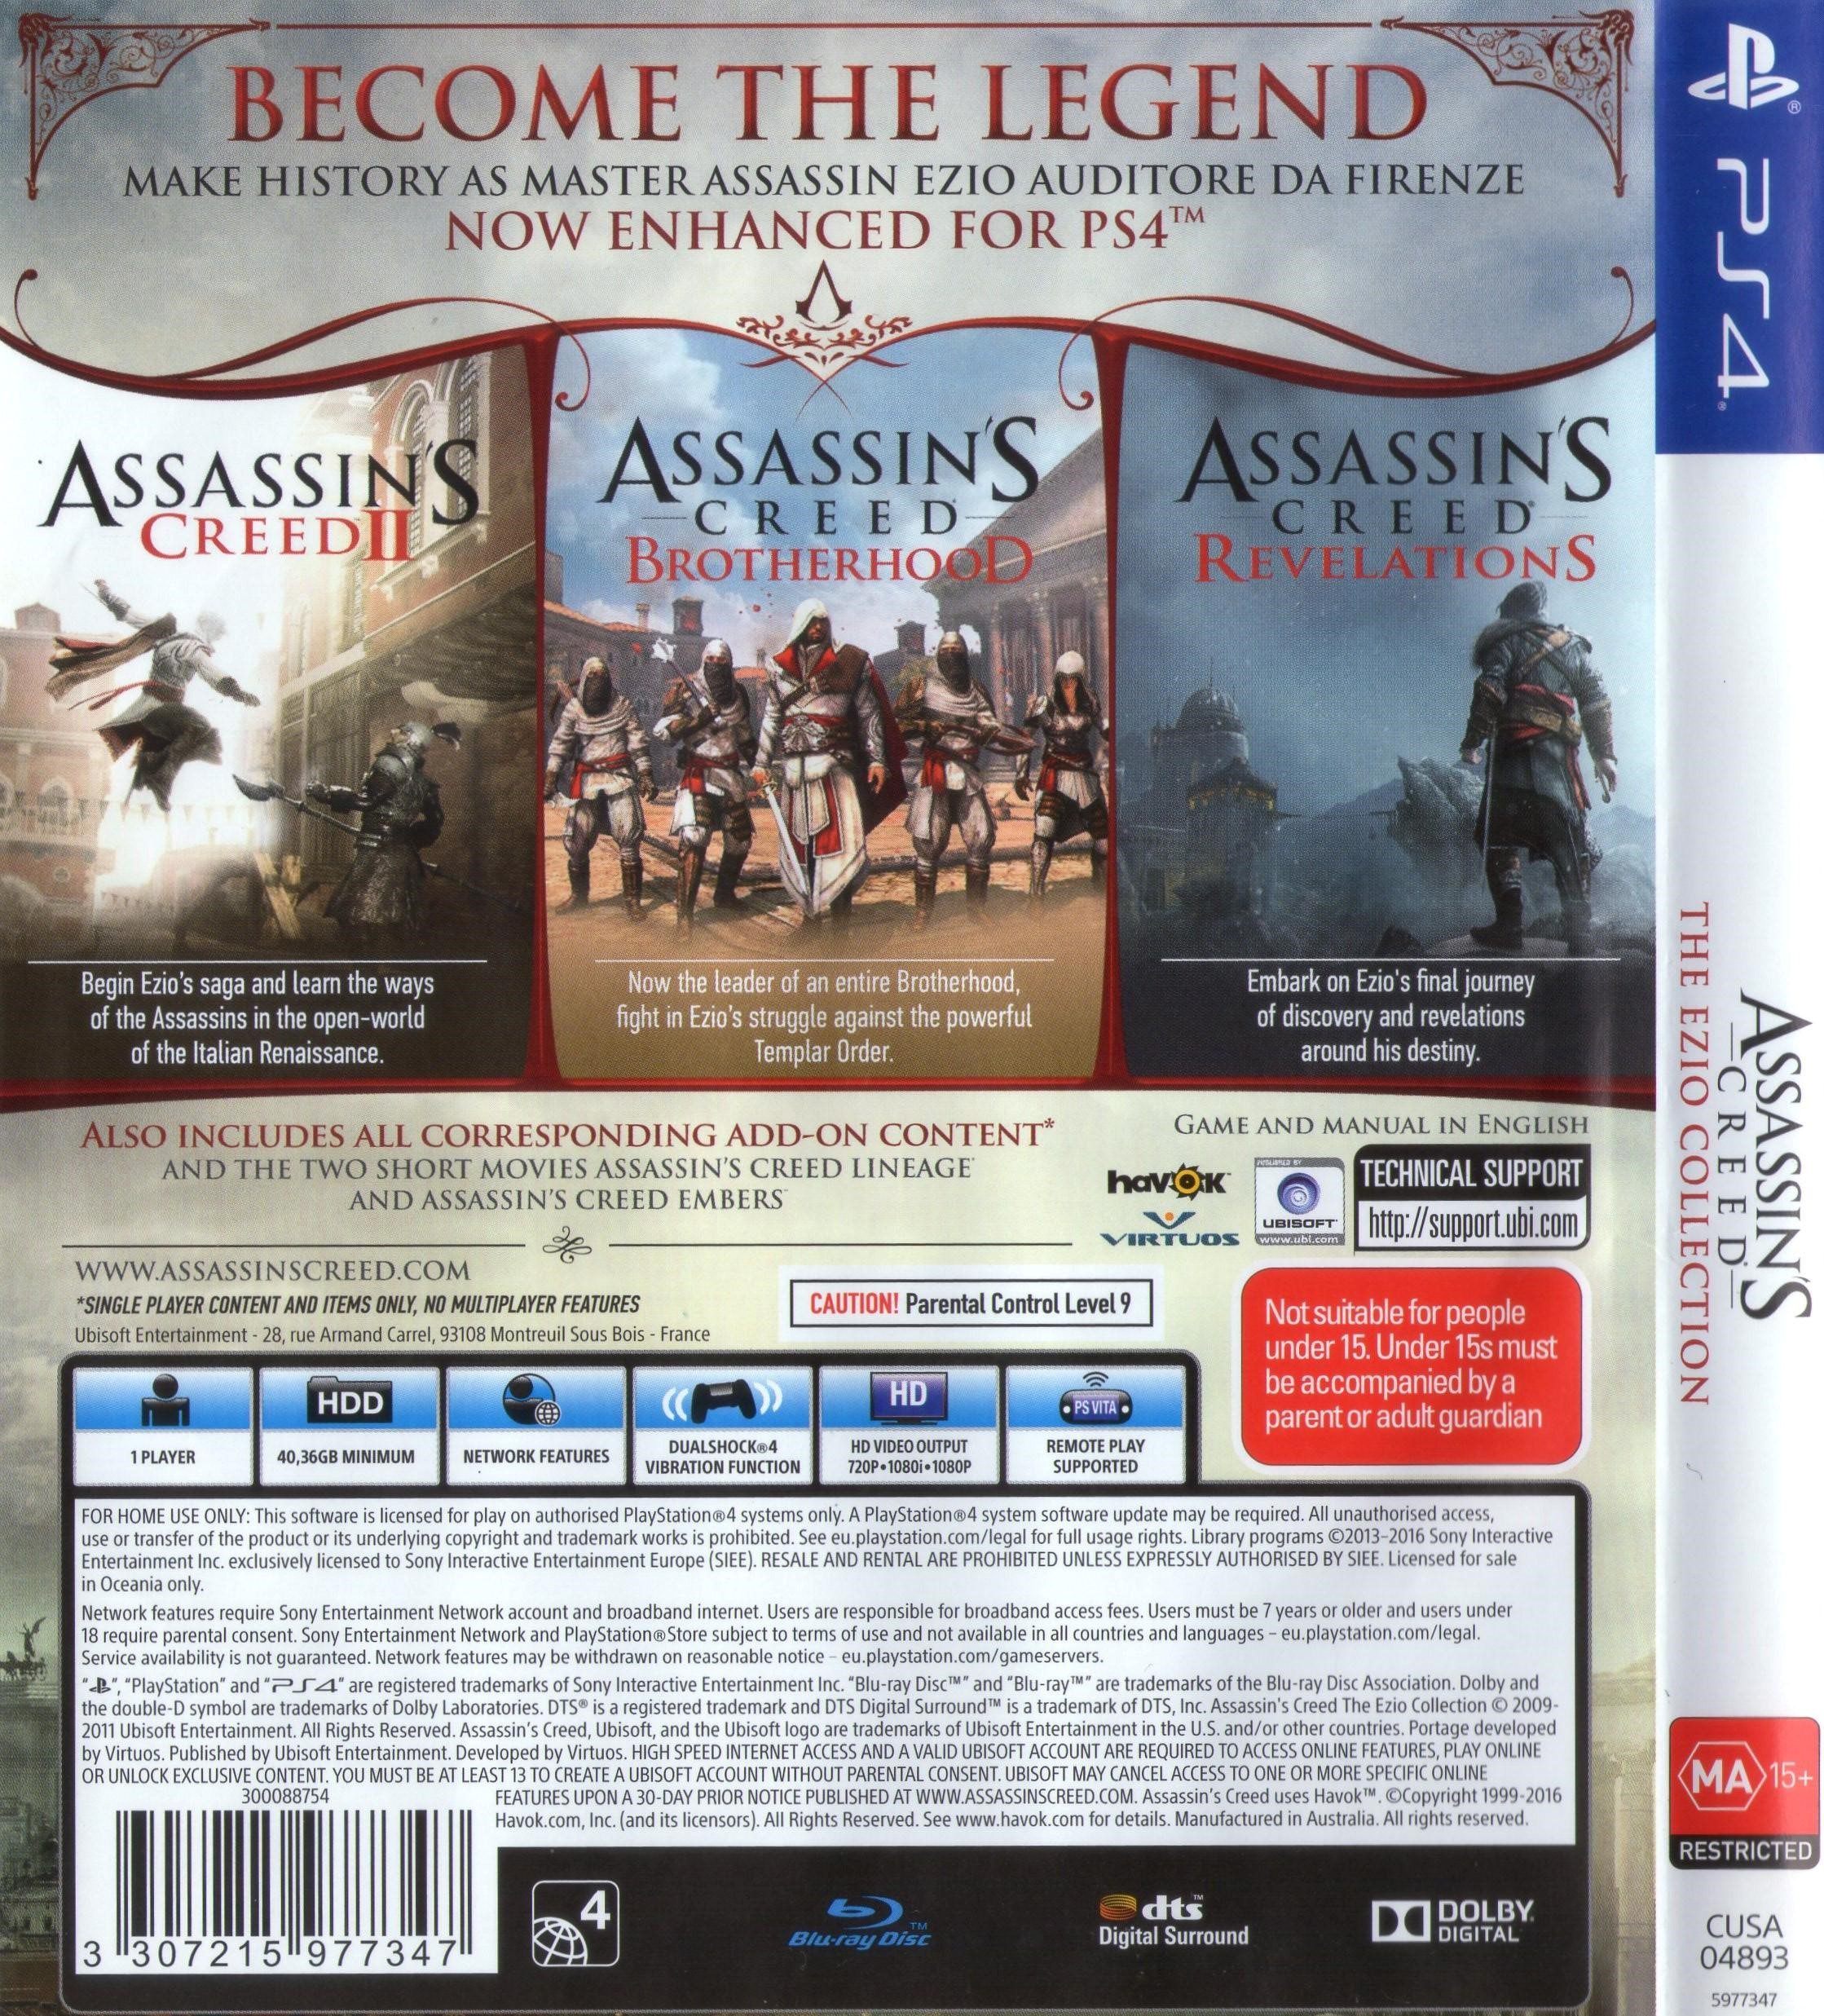 Assassin’s Creed: The Ezio Collection PS4